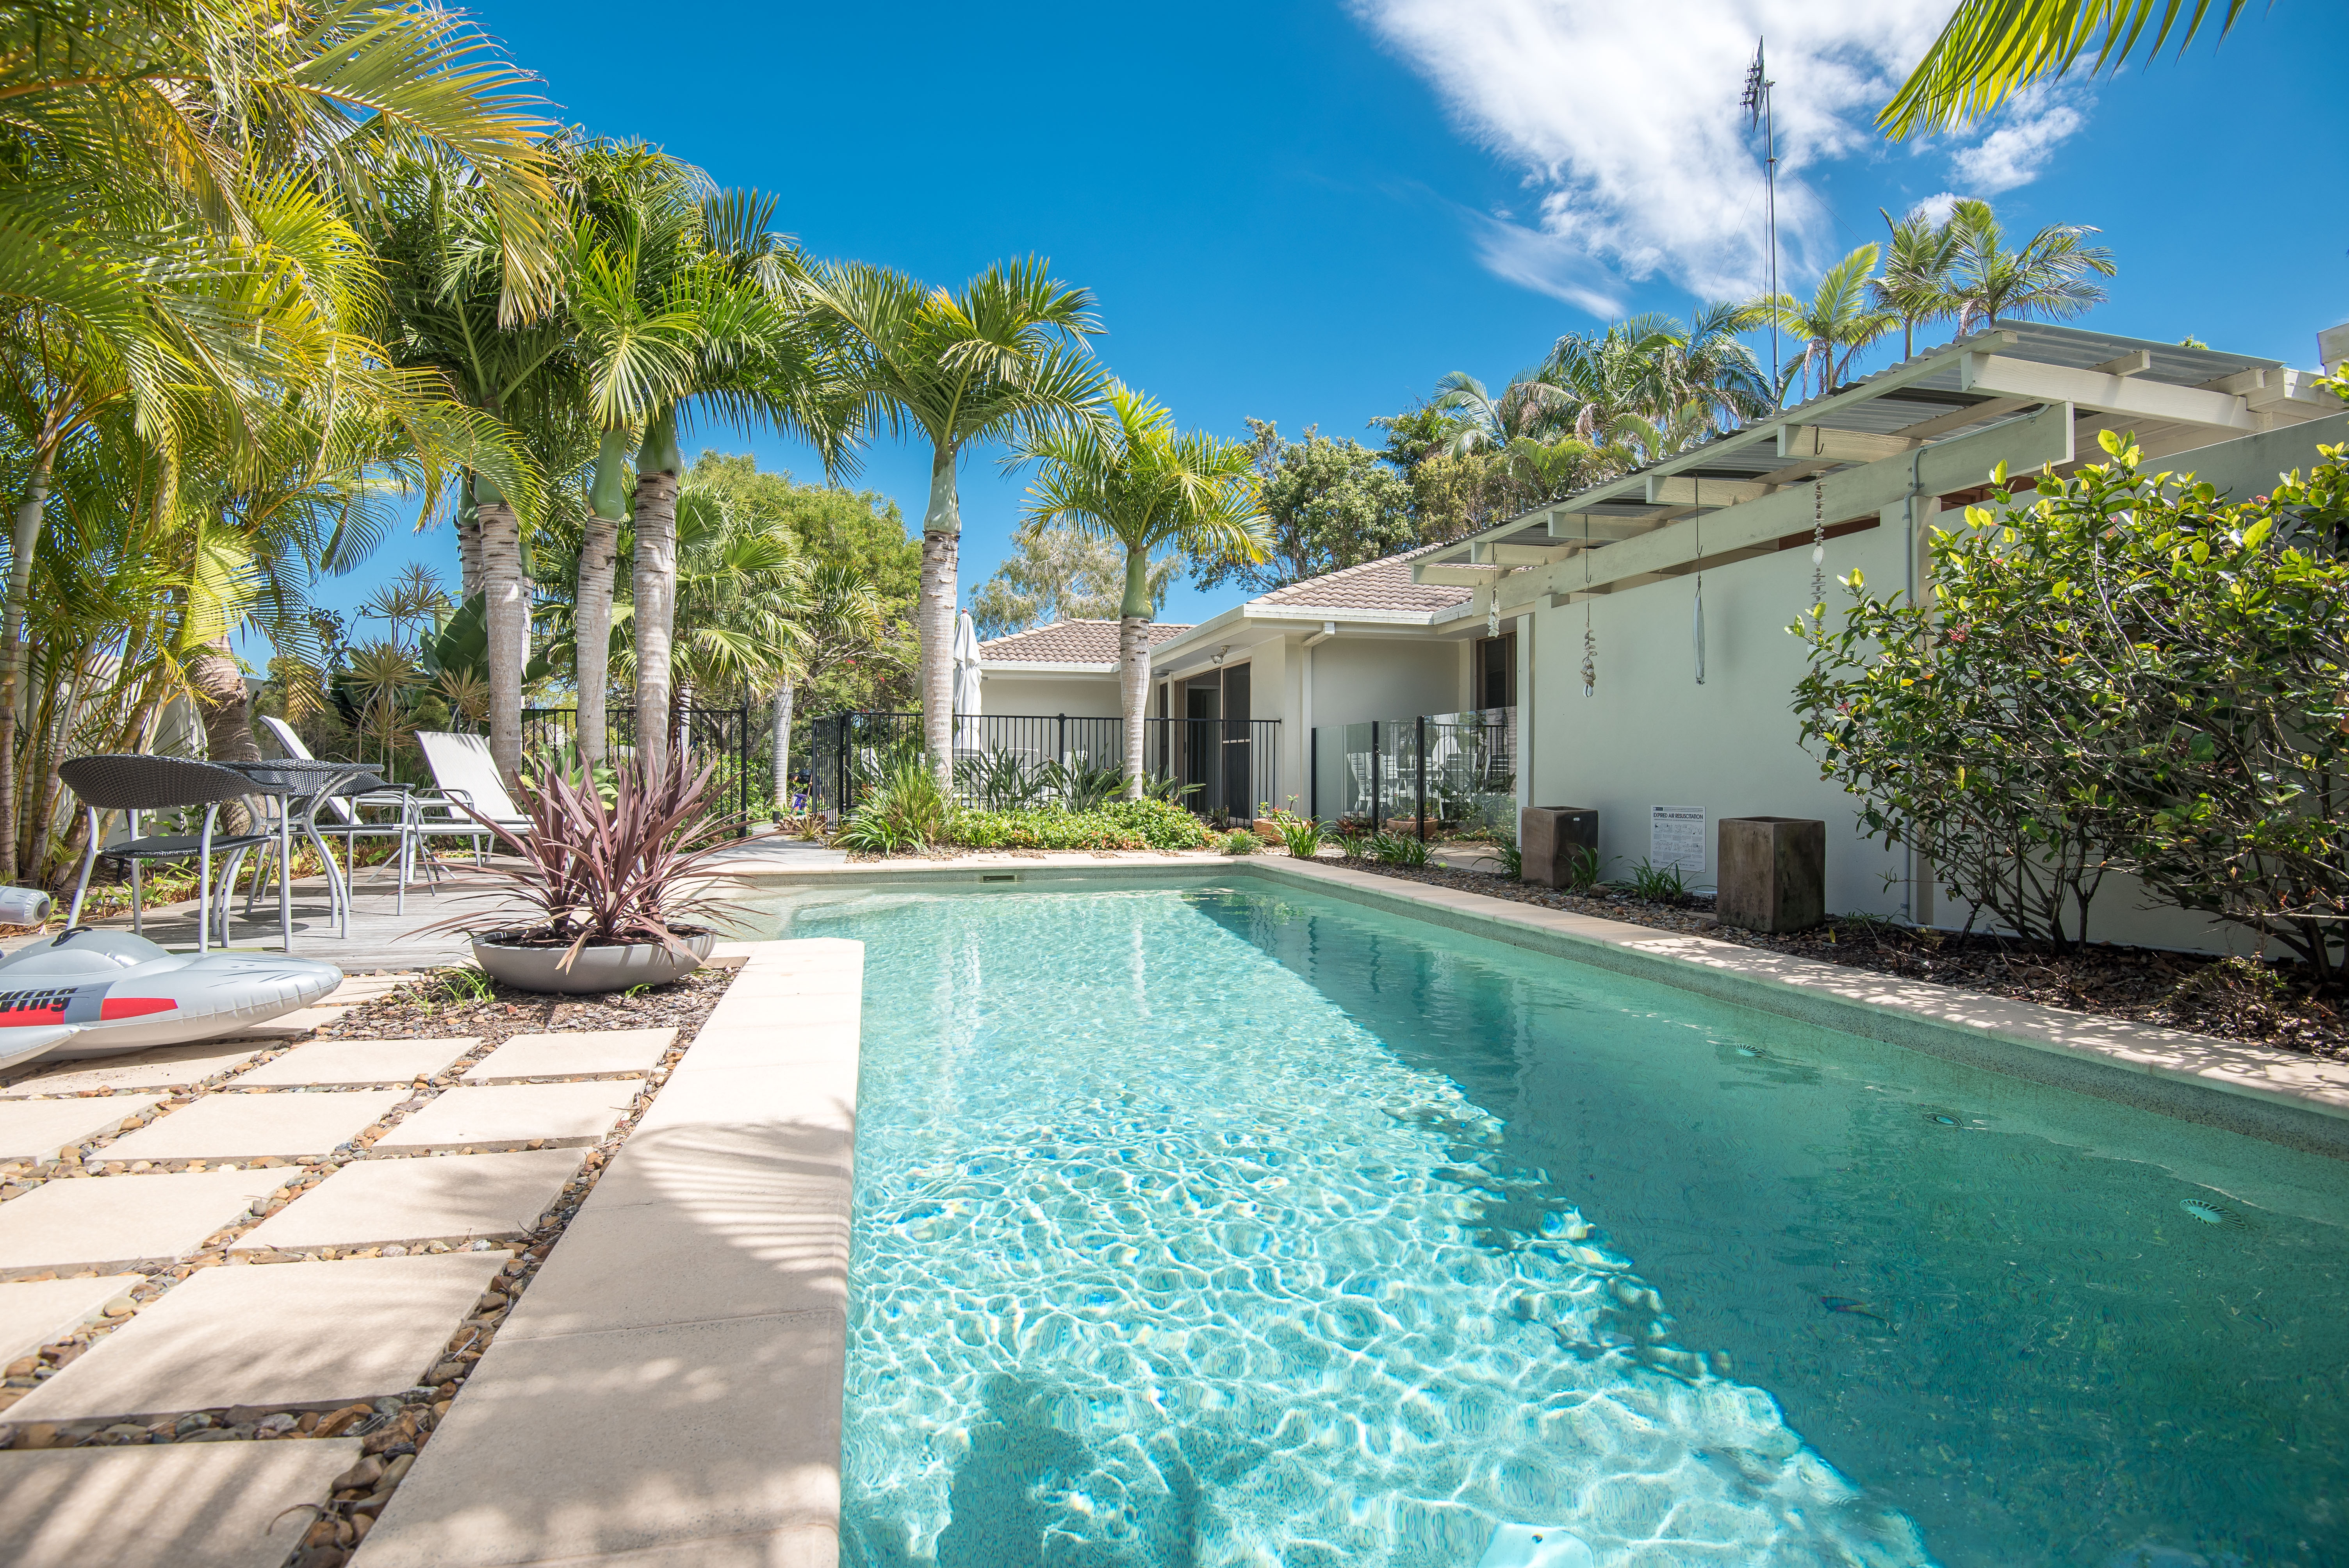 A large swimming pool in the backyard of a holiday rental in Sunrise Beach Queensland